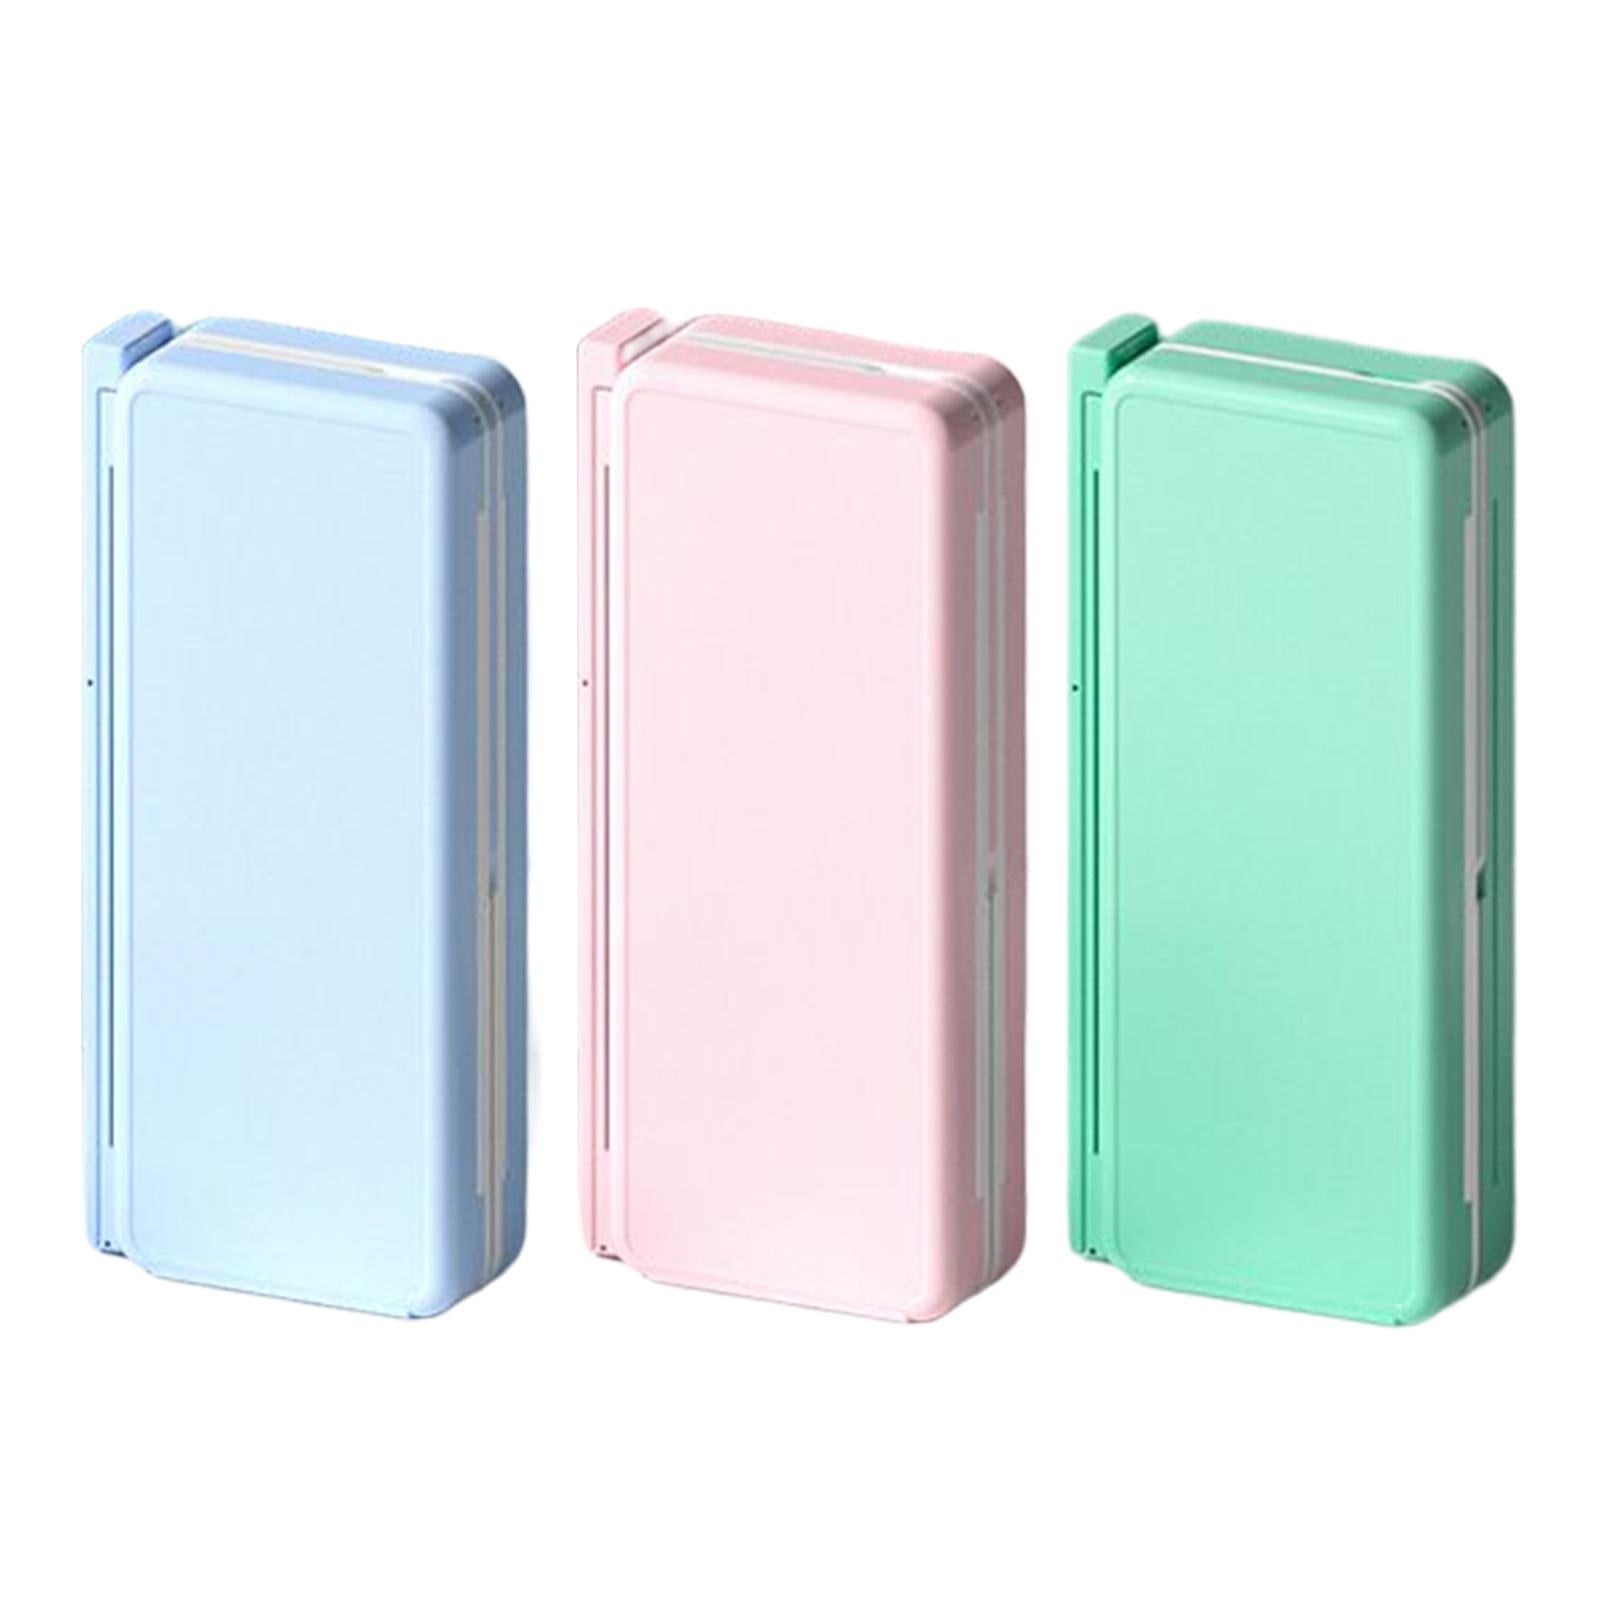 2in1 Book Stand Pencil Box Foldable Page Clips Table Home Textbook Blue